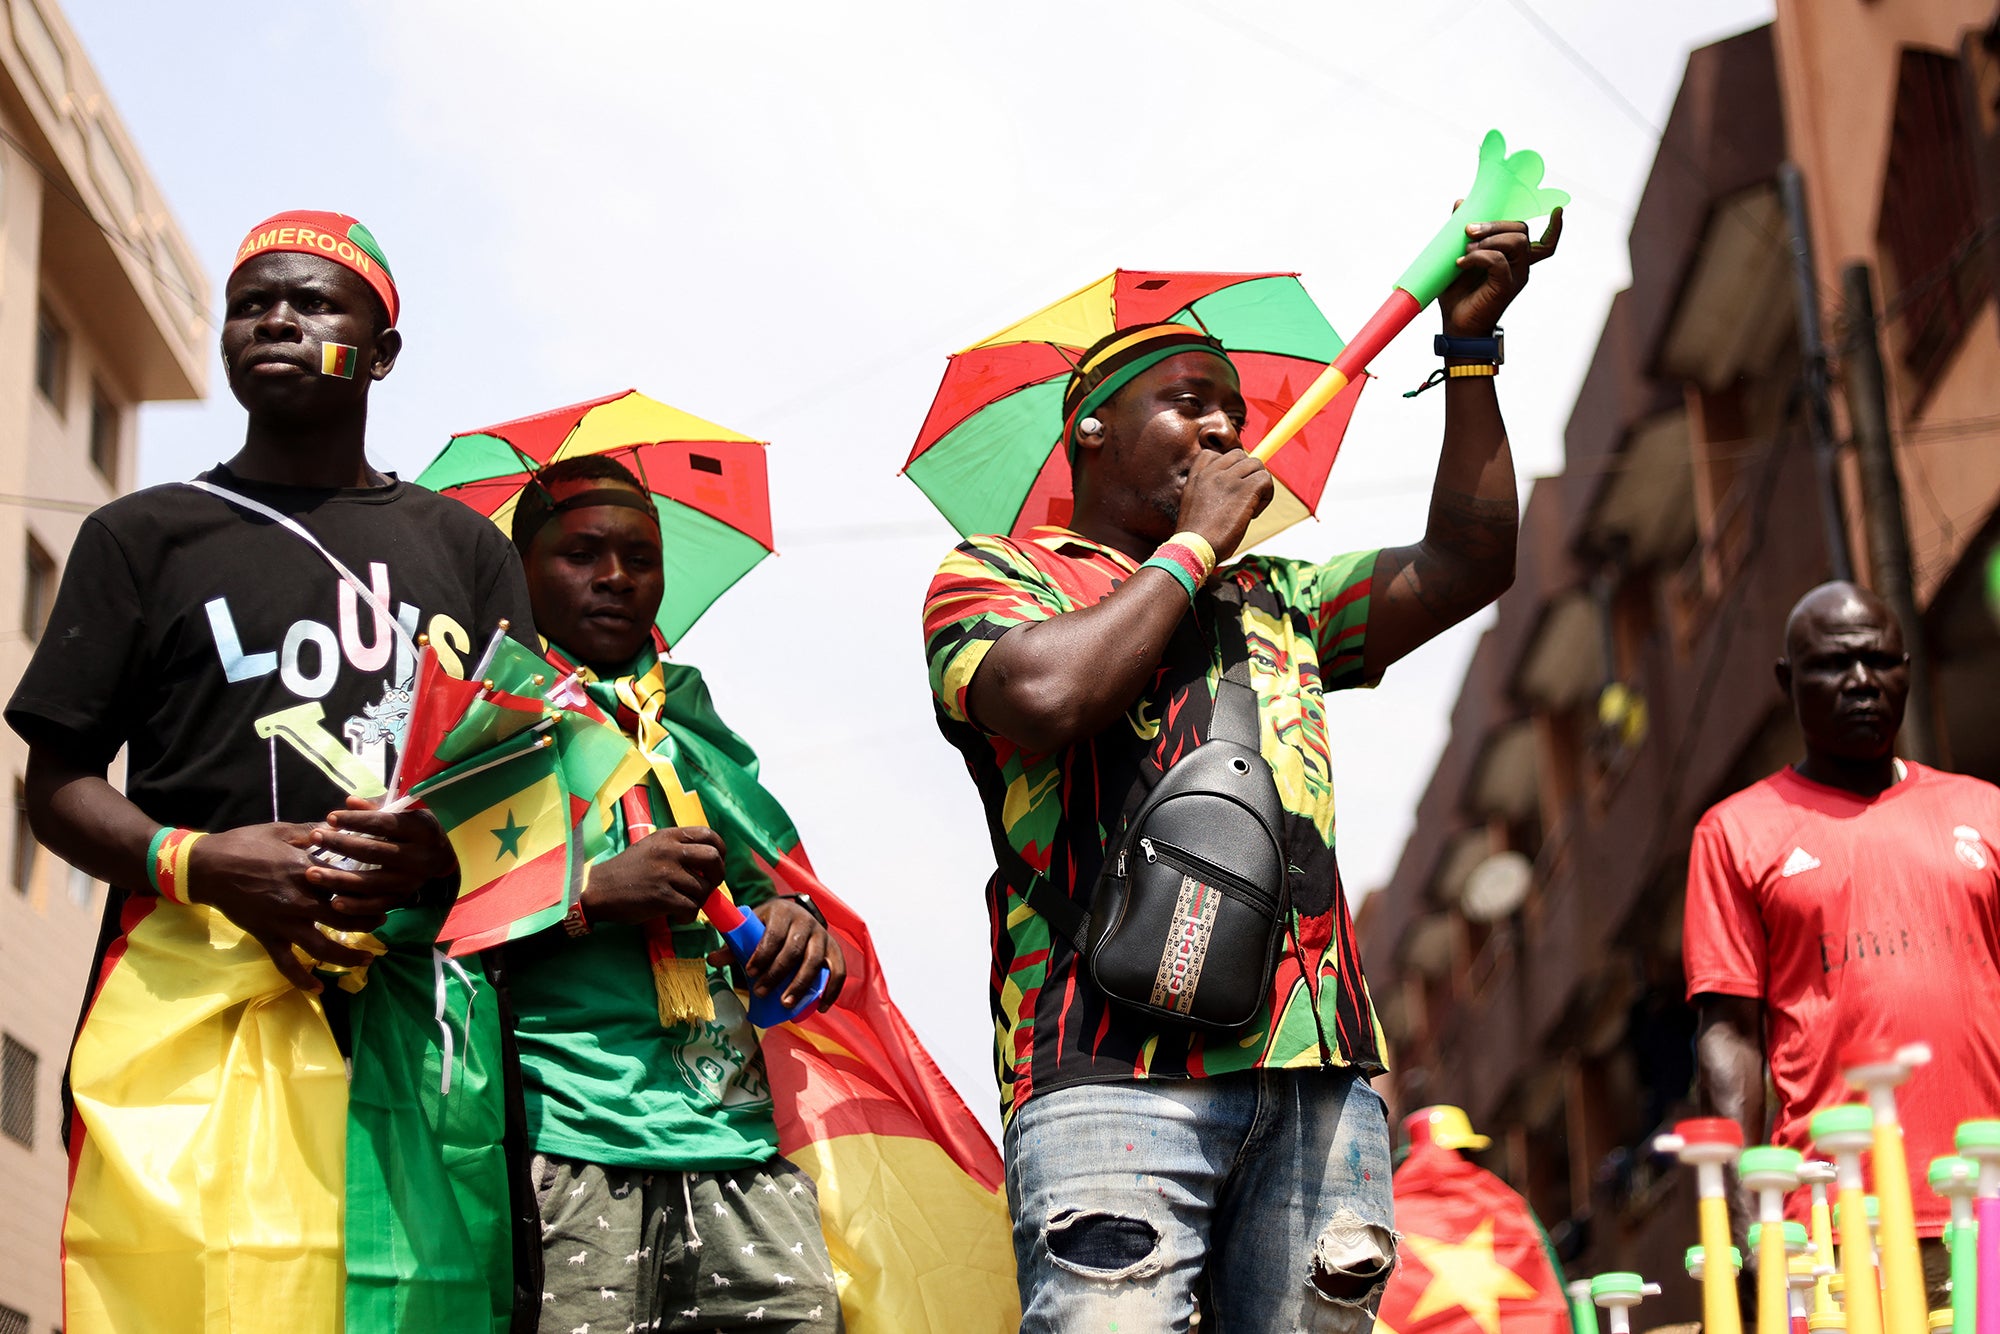 Fans in Yaoundé are getting excited for the start of AFCON